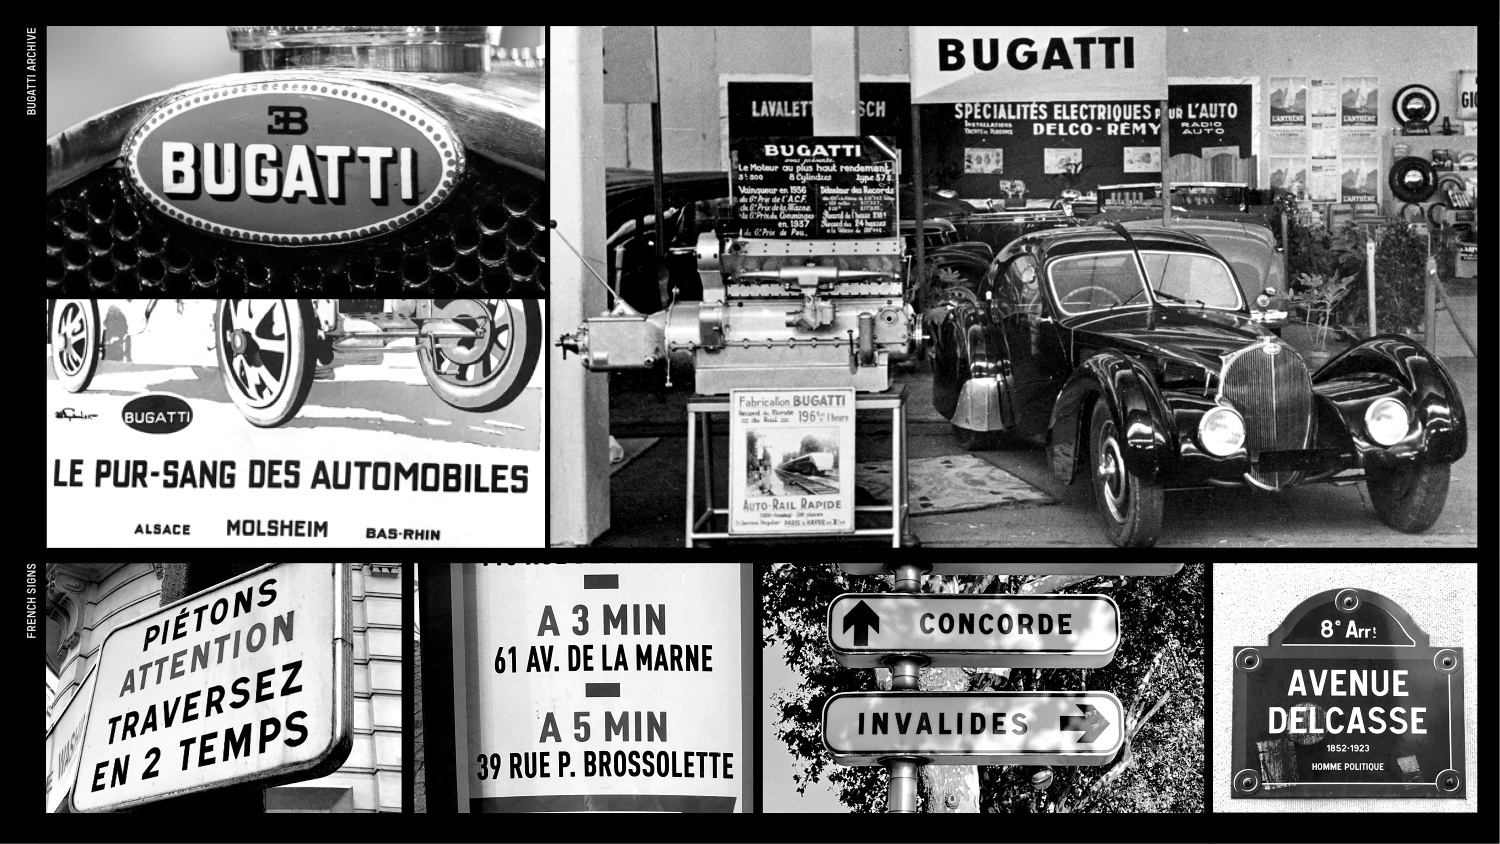 Inspiration for the Bugatti logo and new typography